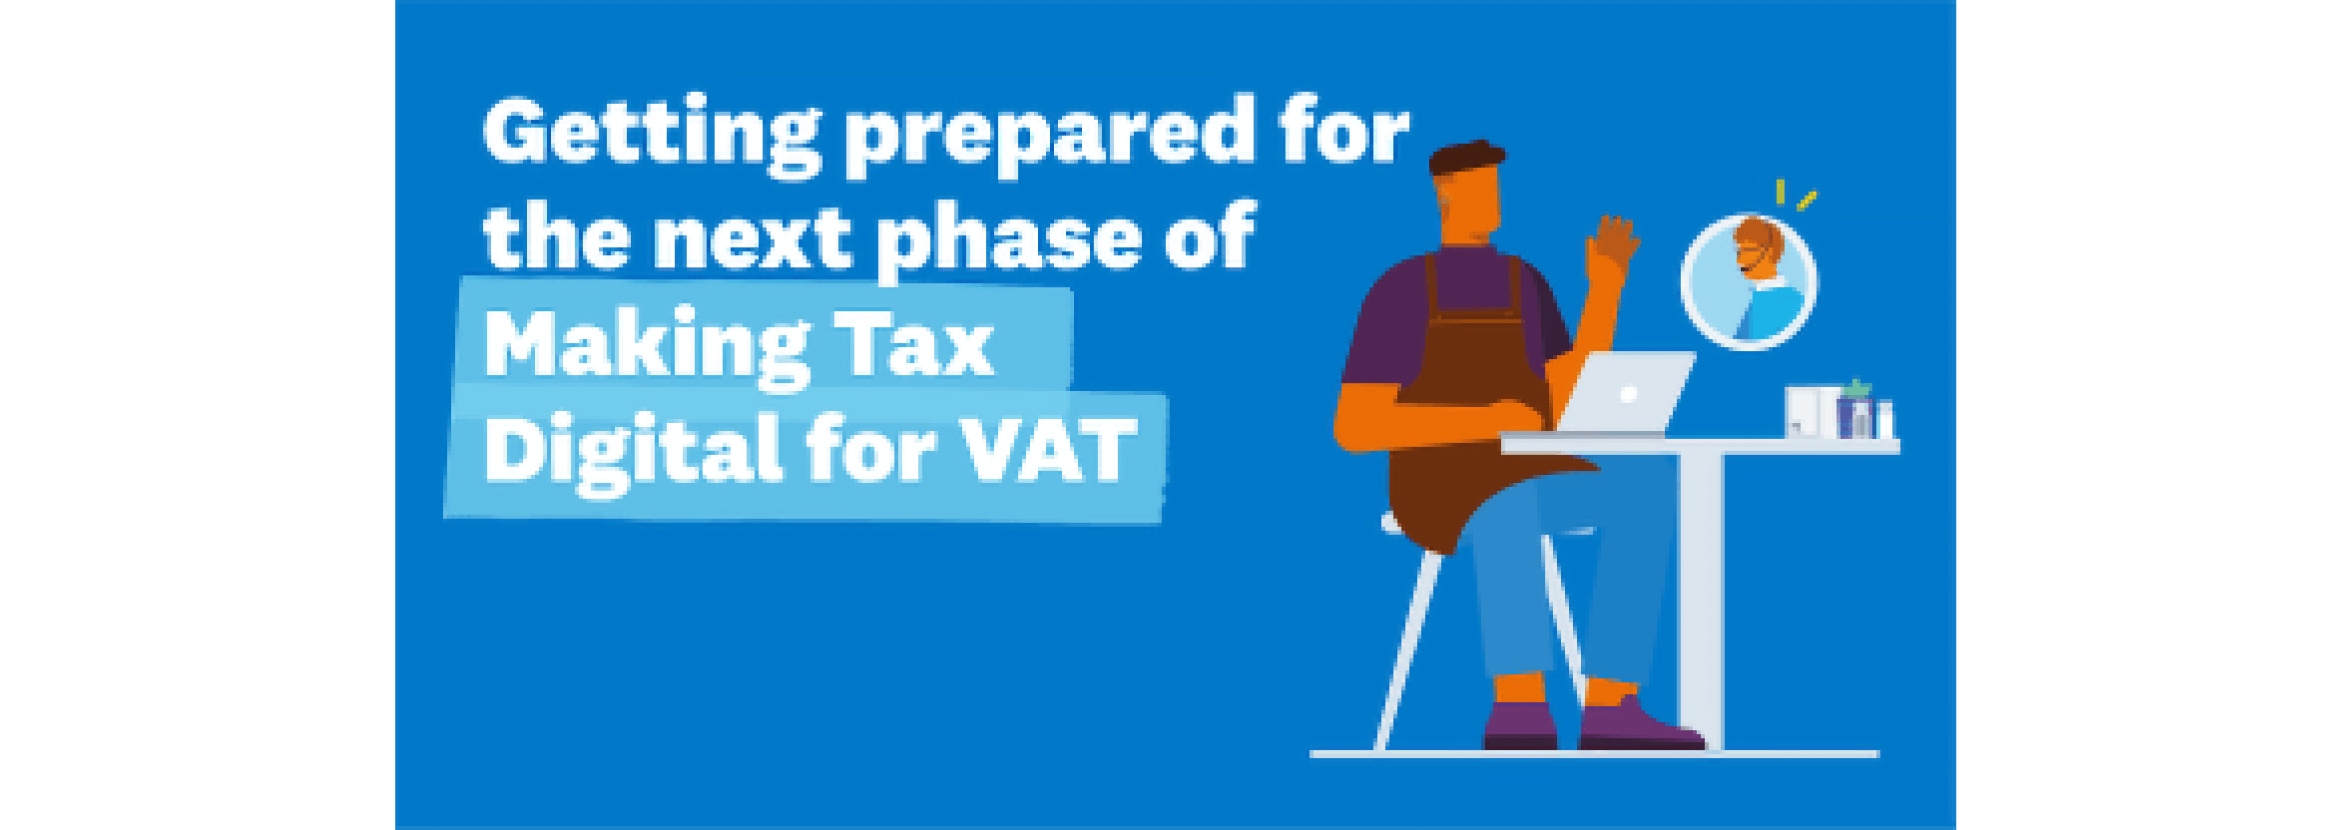 A tradesperson talks to their account online about preparing for the next phase of MTD for VAT.